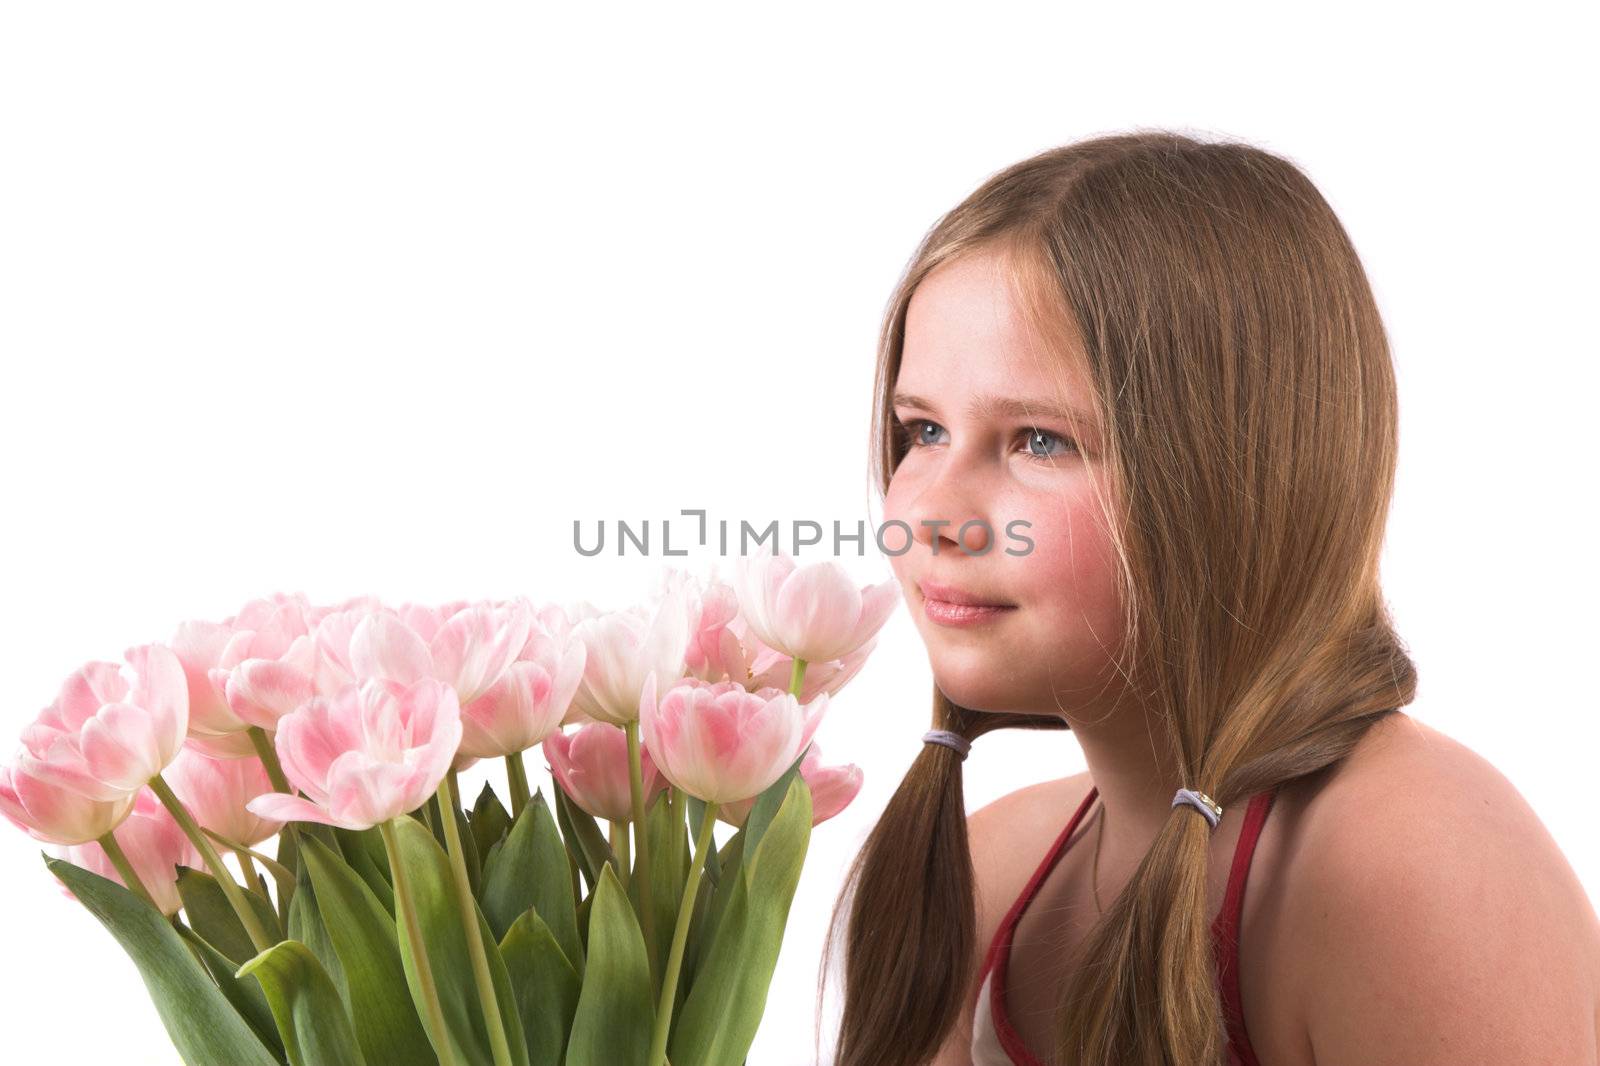 Pretty girl with pink tulips